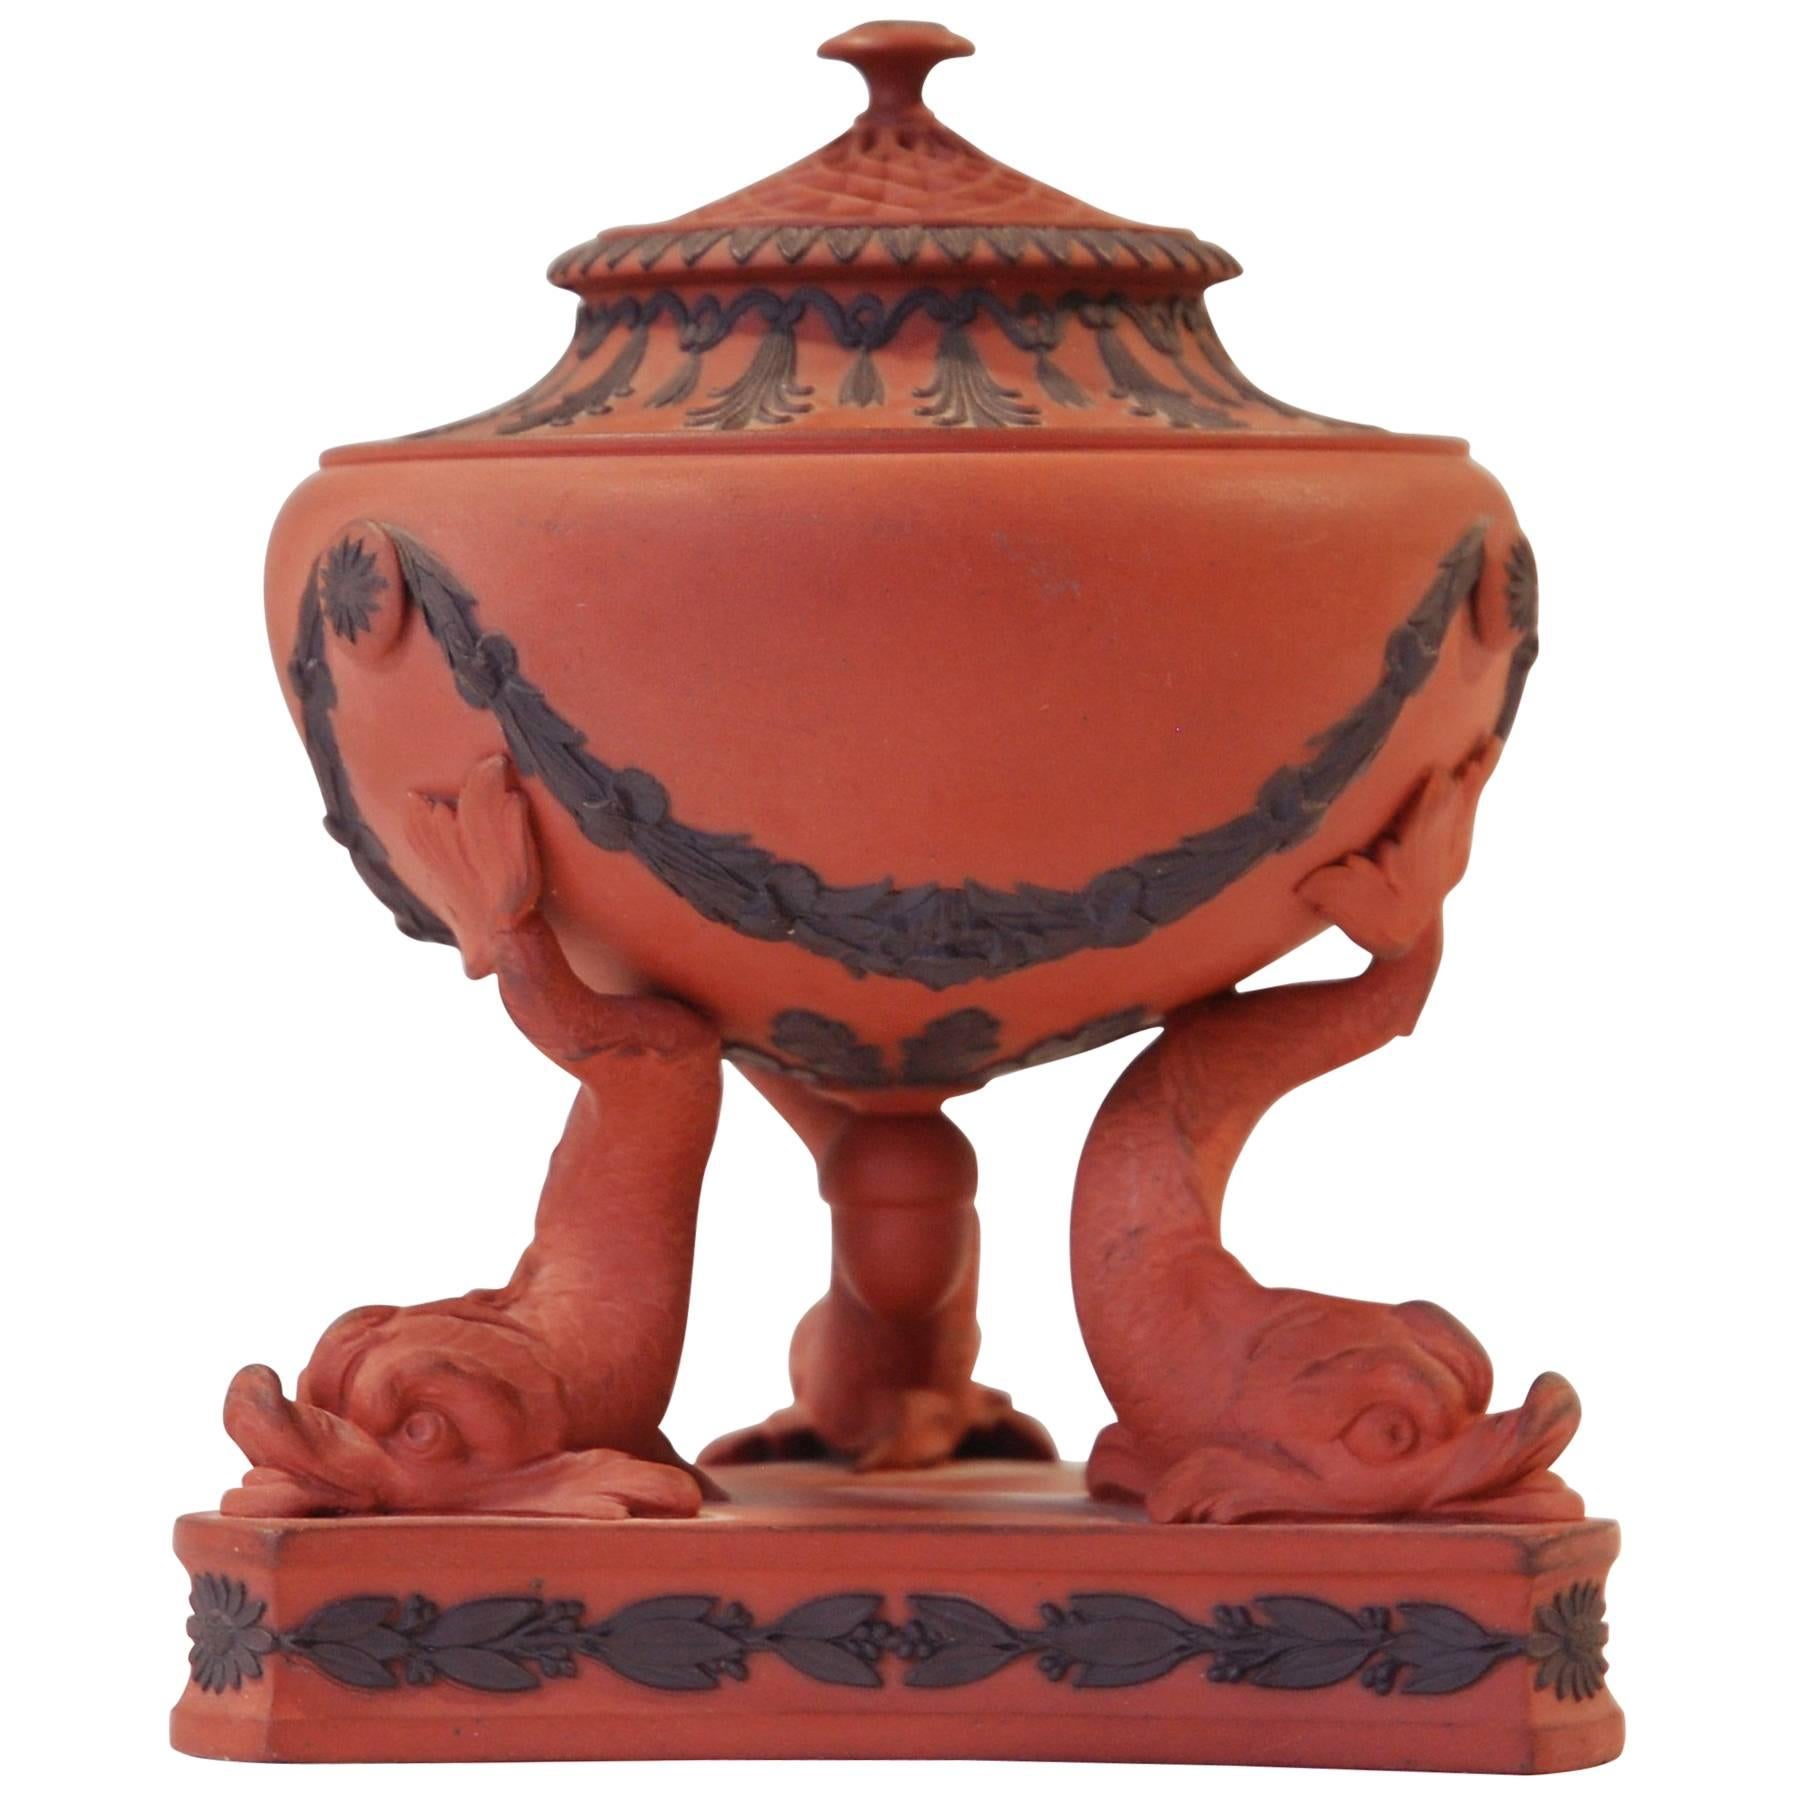 Pastille Burner on Dolphin Supports in Rosso Antico, Wedgwood, circa 1810